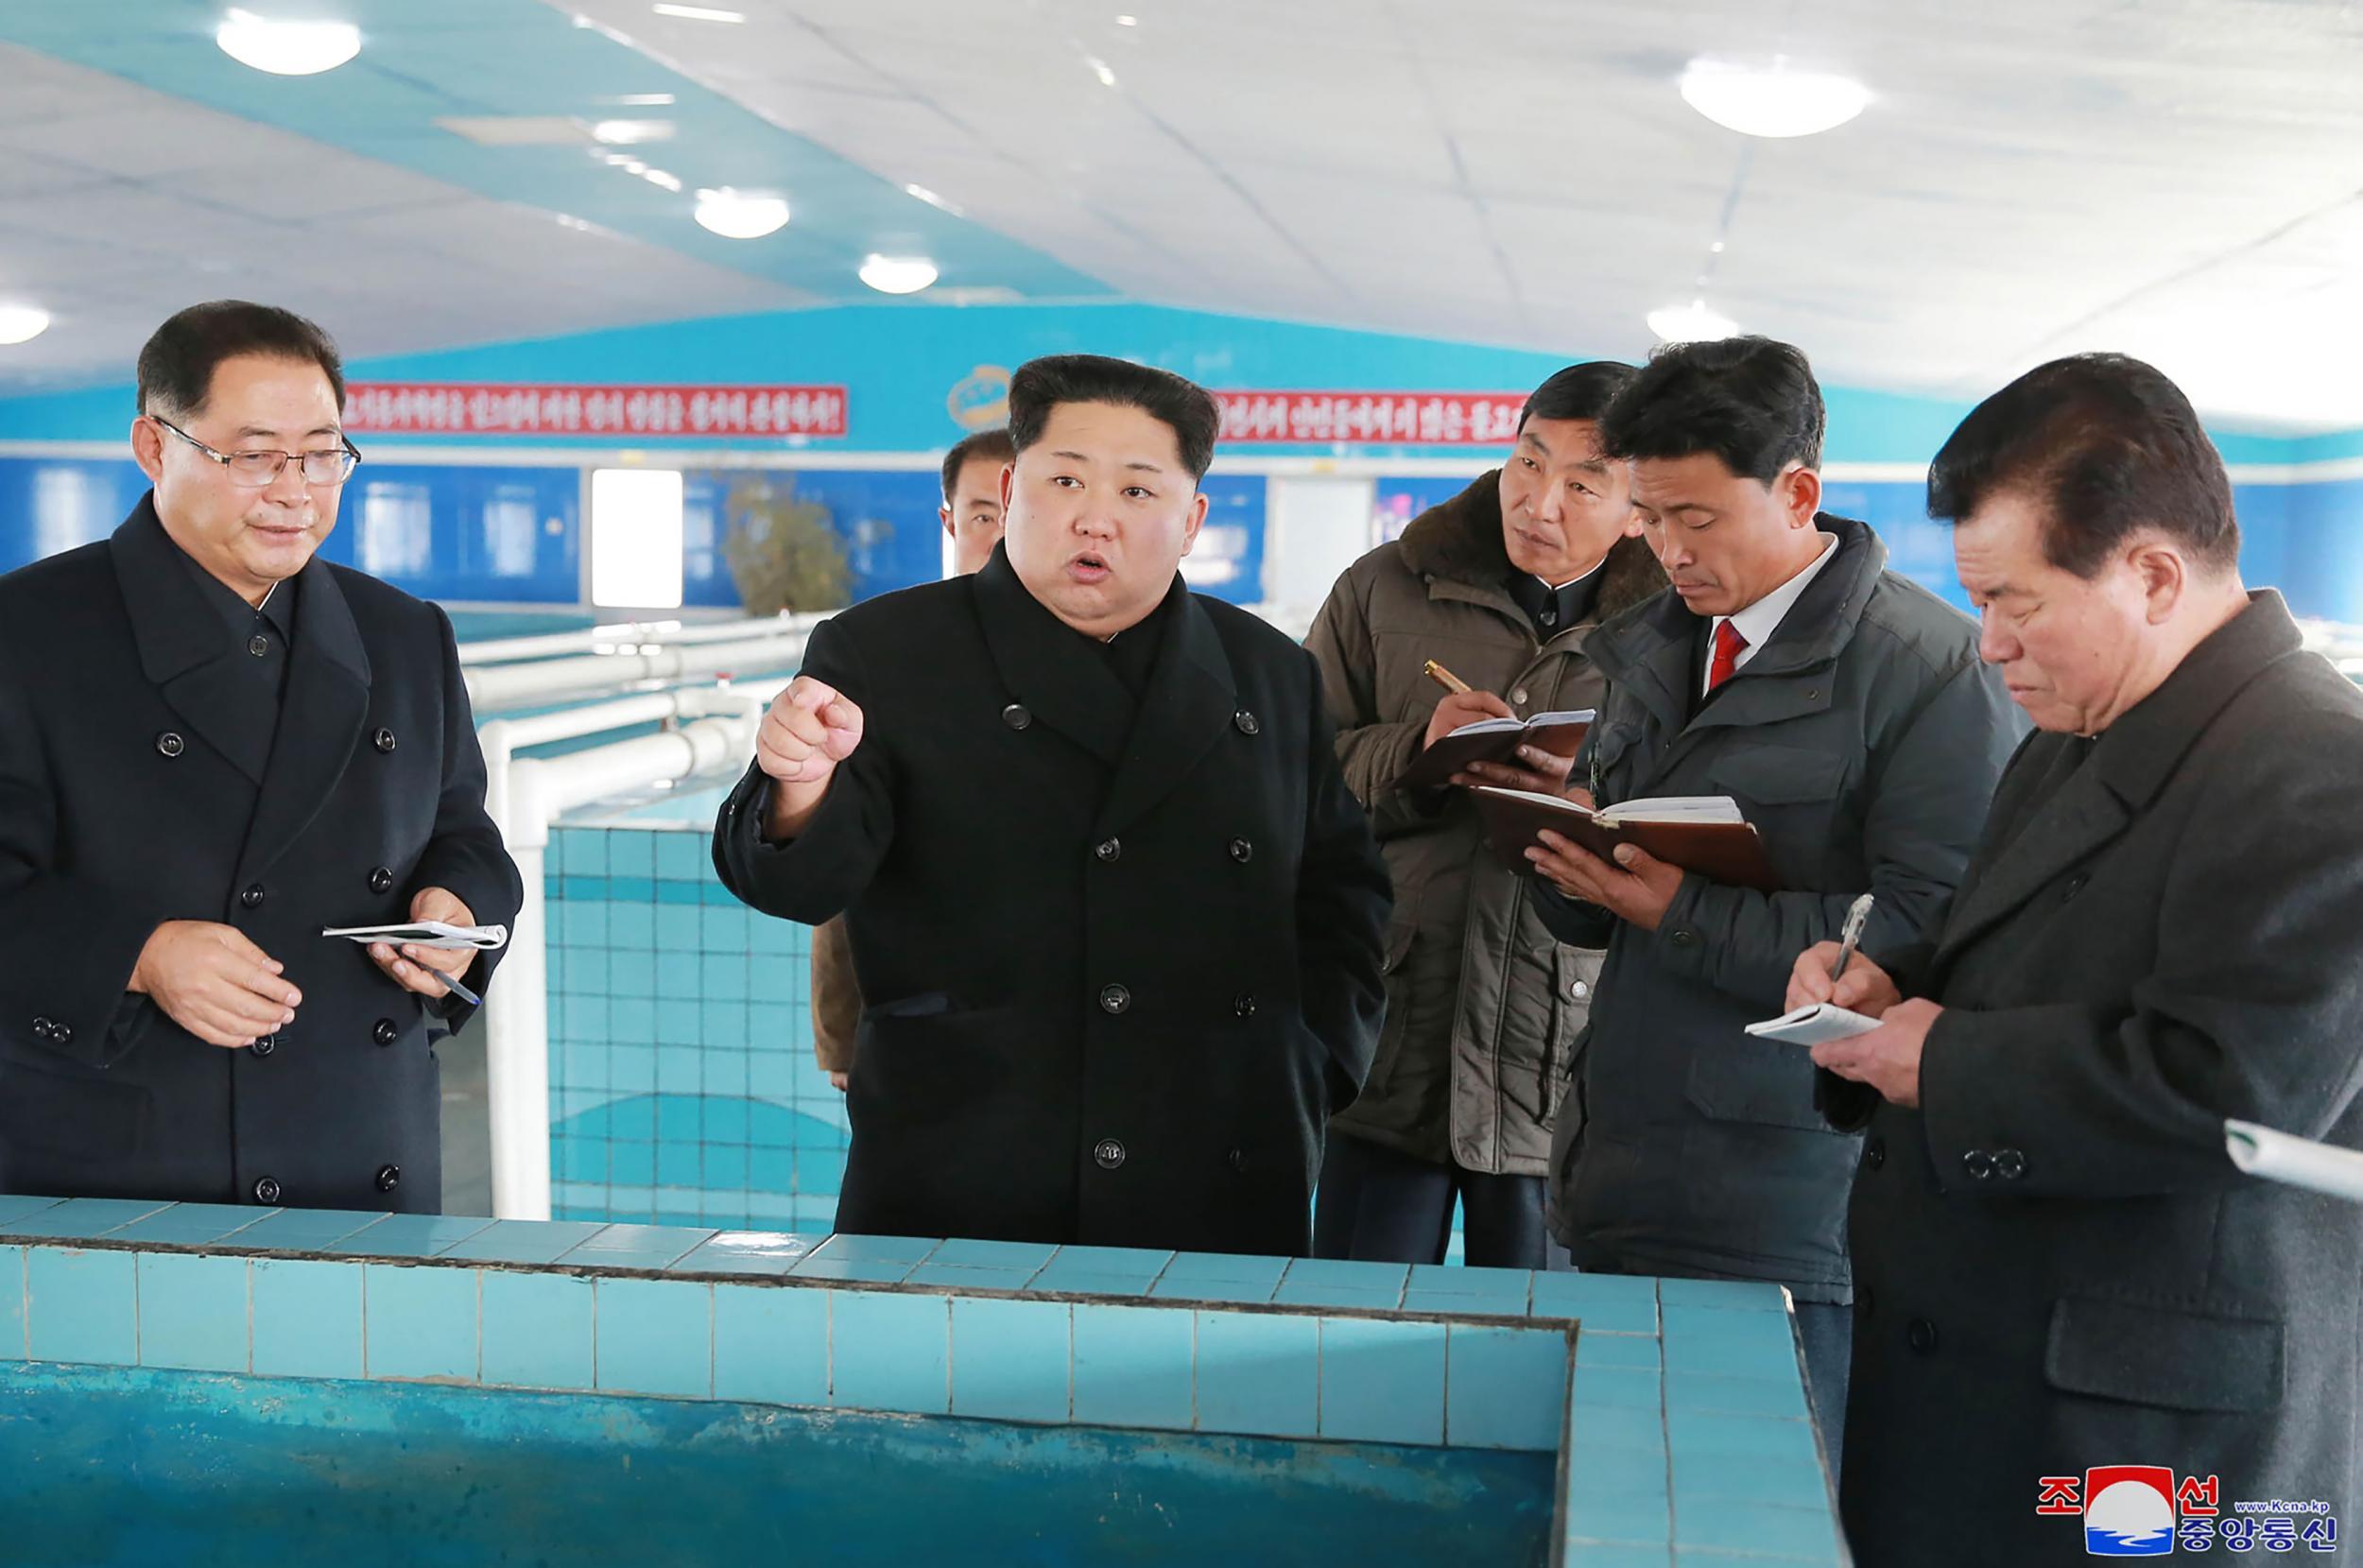 This undated photo released by North Korea's official Korean Central News Agency show Kim Jong-Un at the newly built Sunchon Catfish Farm